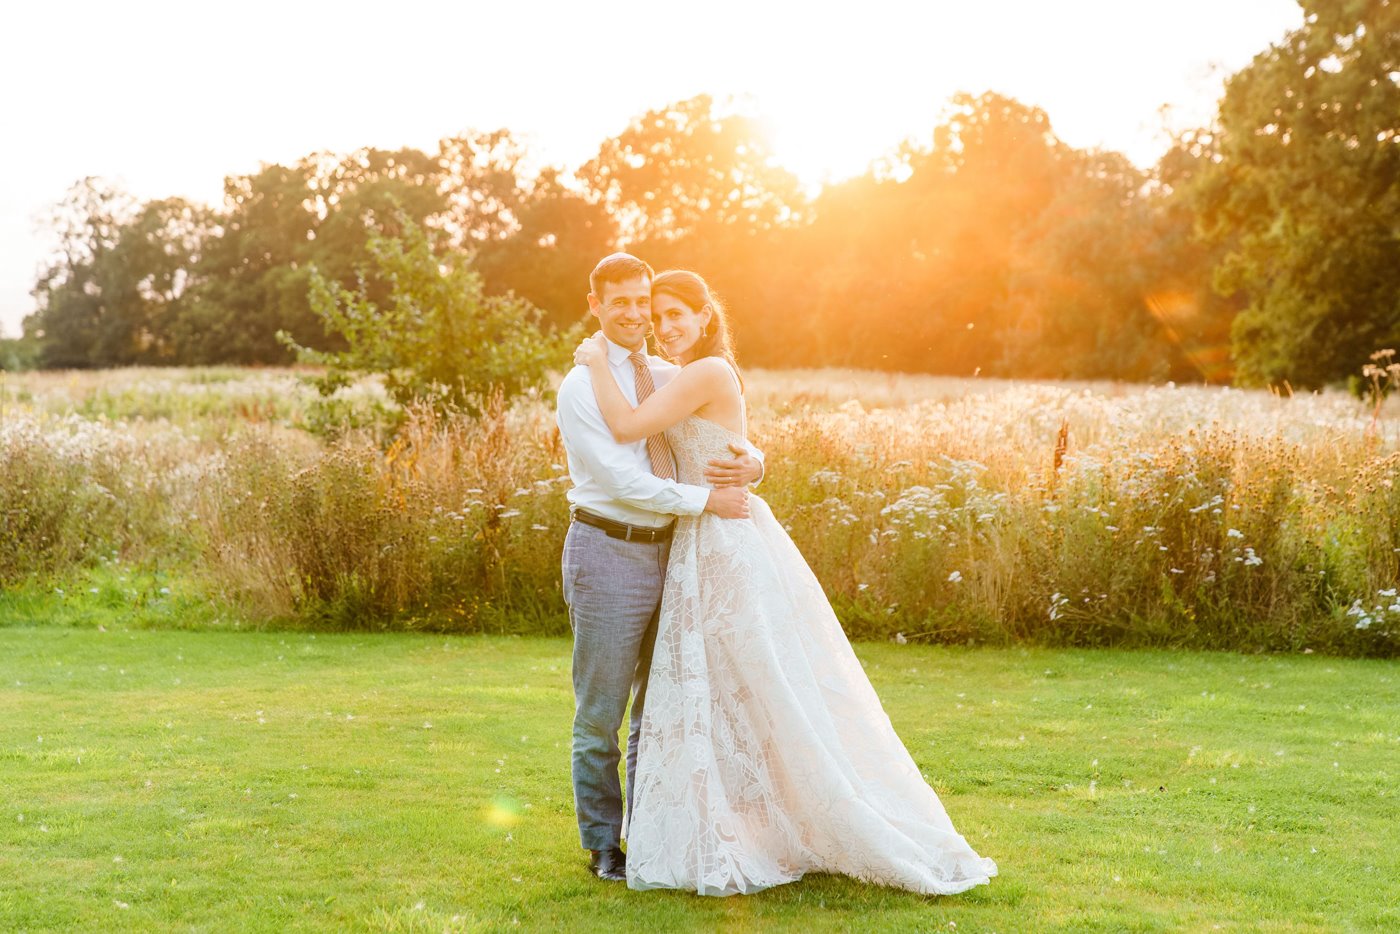 Happily newlywed couple posing in the sunset in the Gillyflower meadow at elmore court